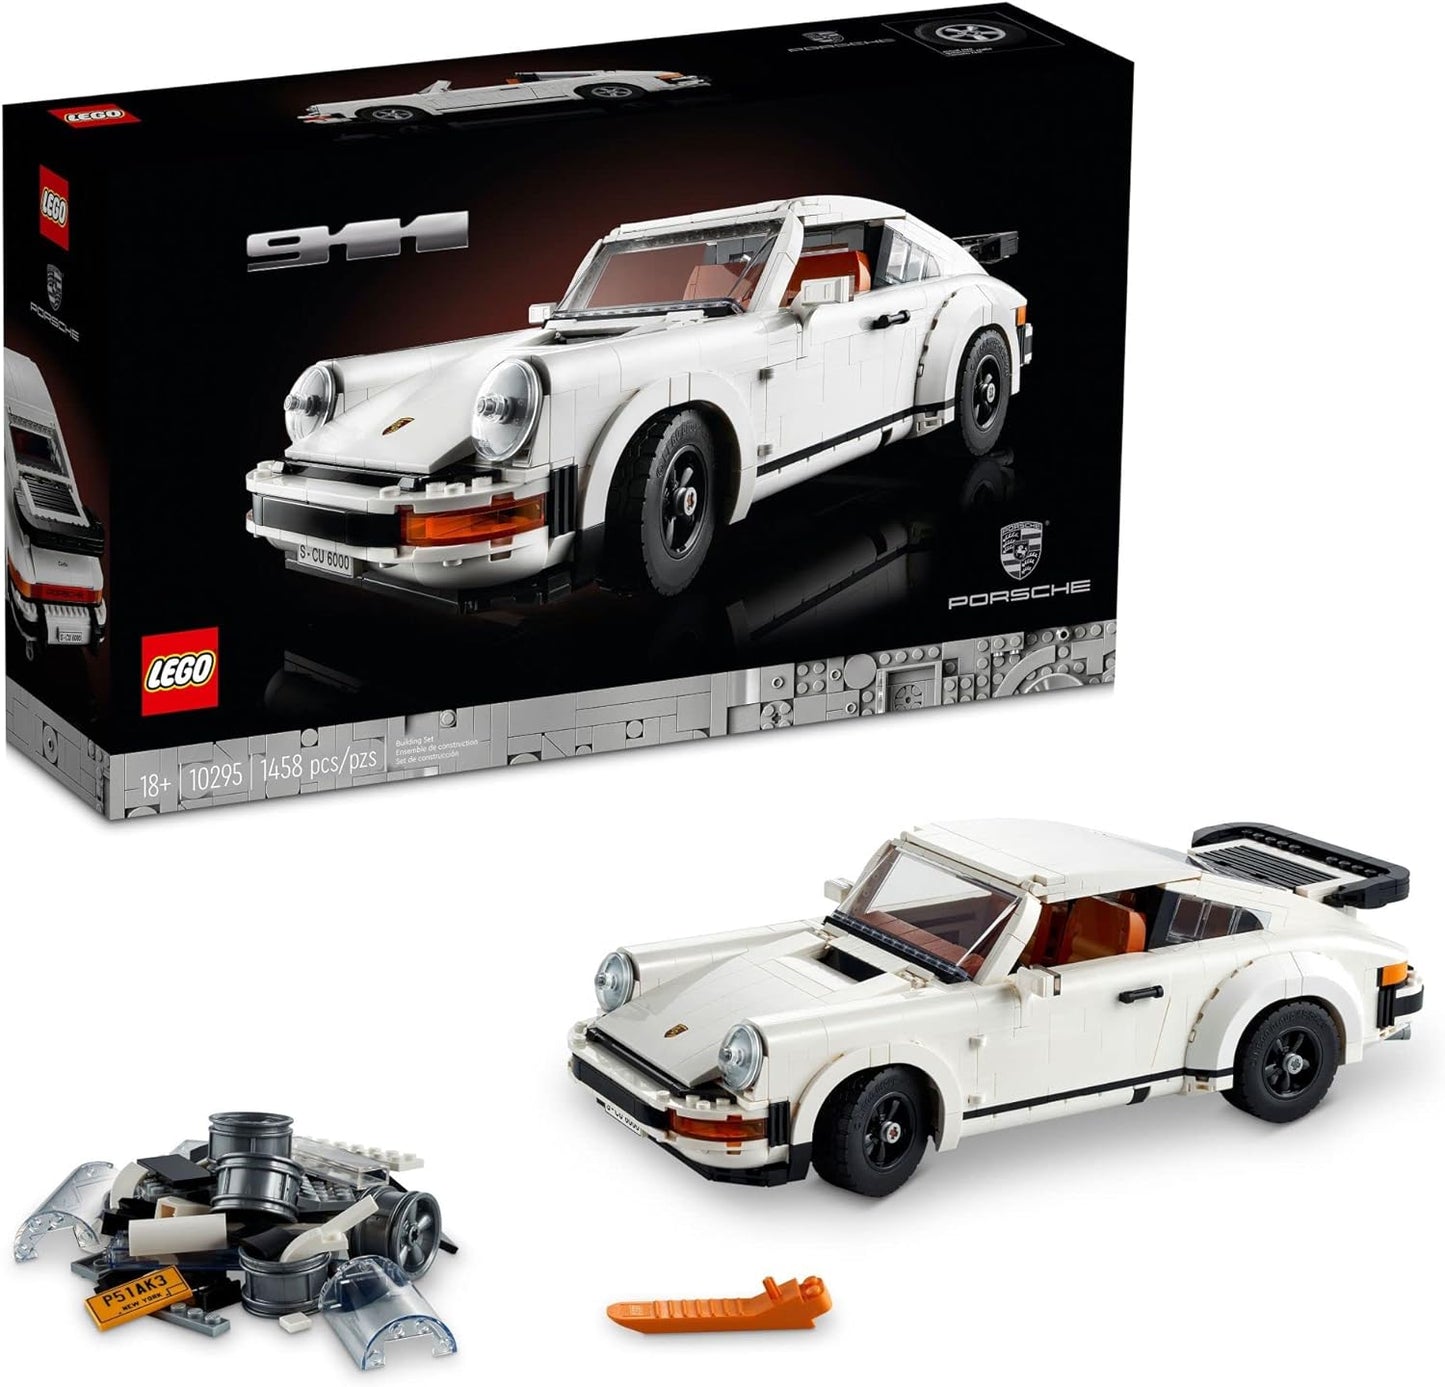 LEGO Icons Porsche 911 10295 Building Set, Collectible Turbo Targa, 2in1 Porsche Race Car Model Kit for Adults and Teens to Build, Gift Idea